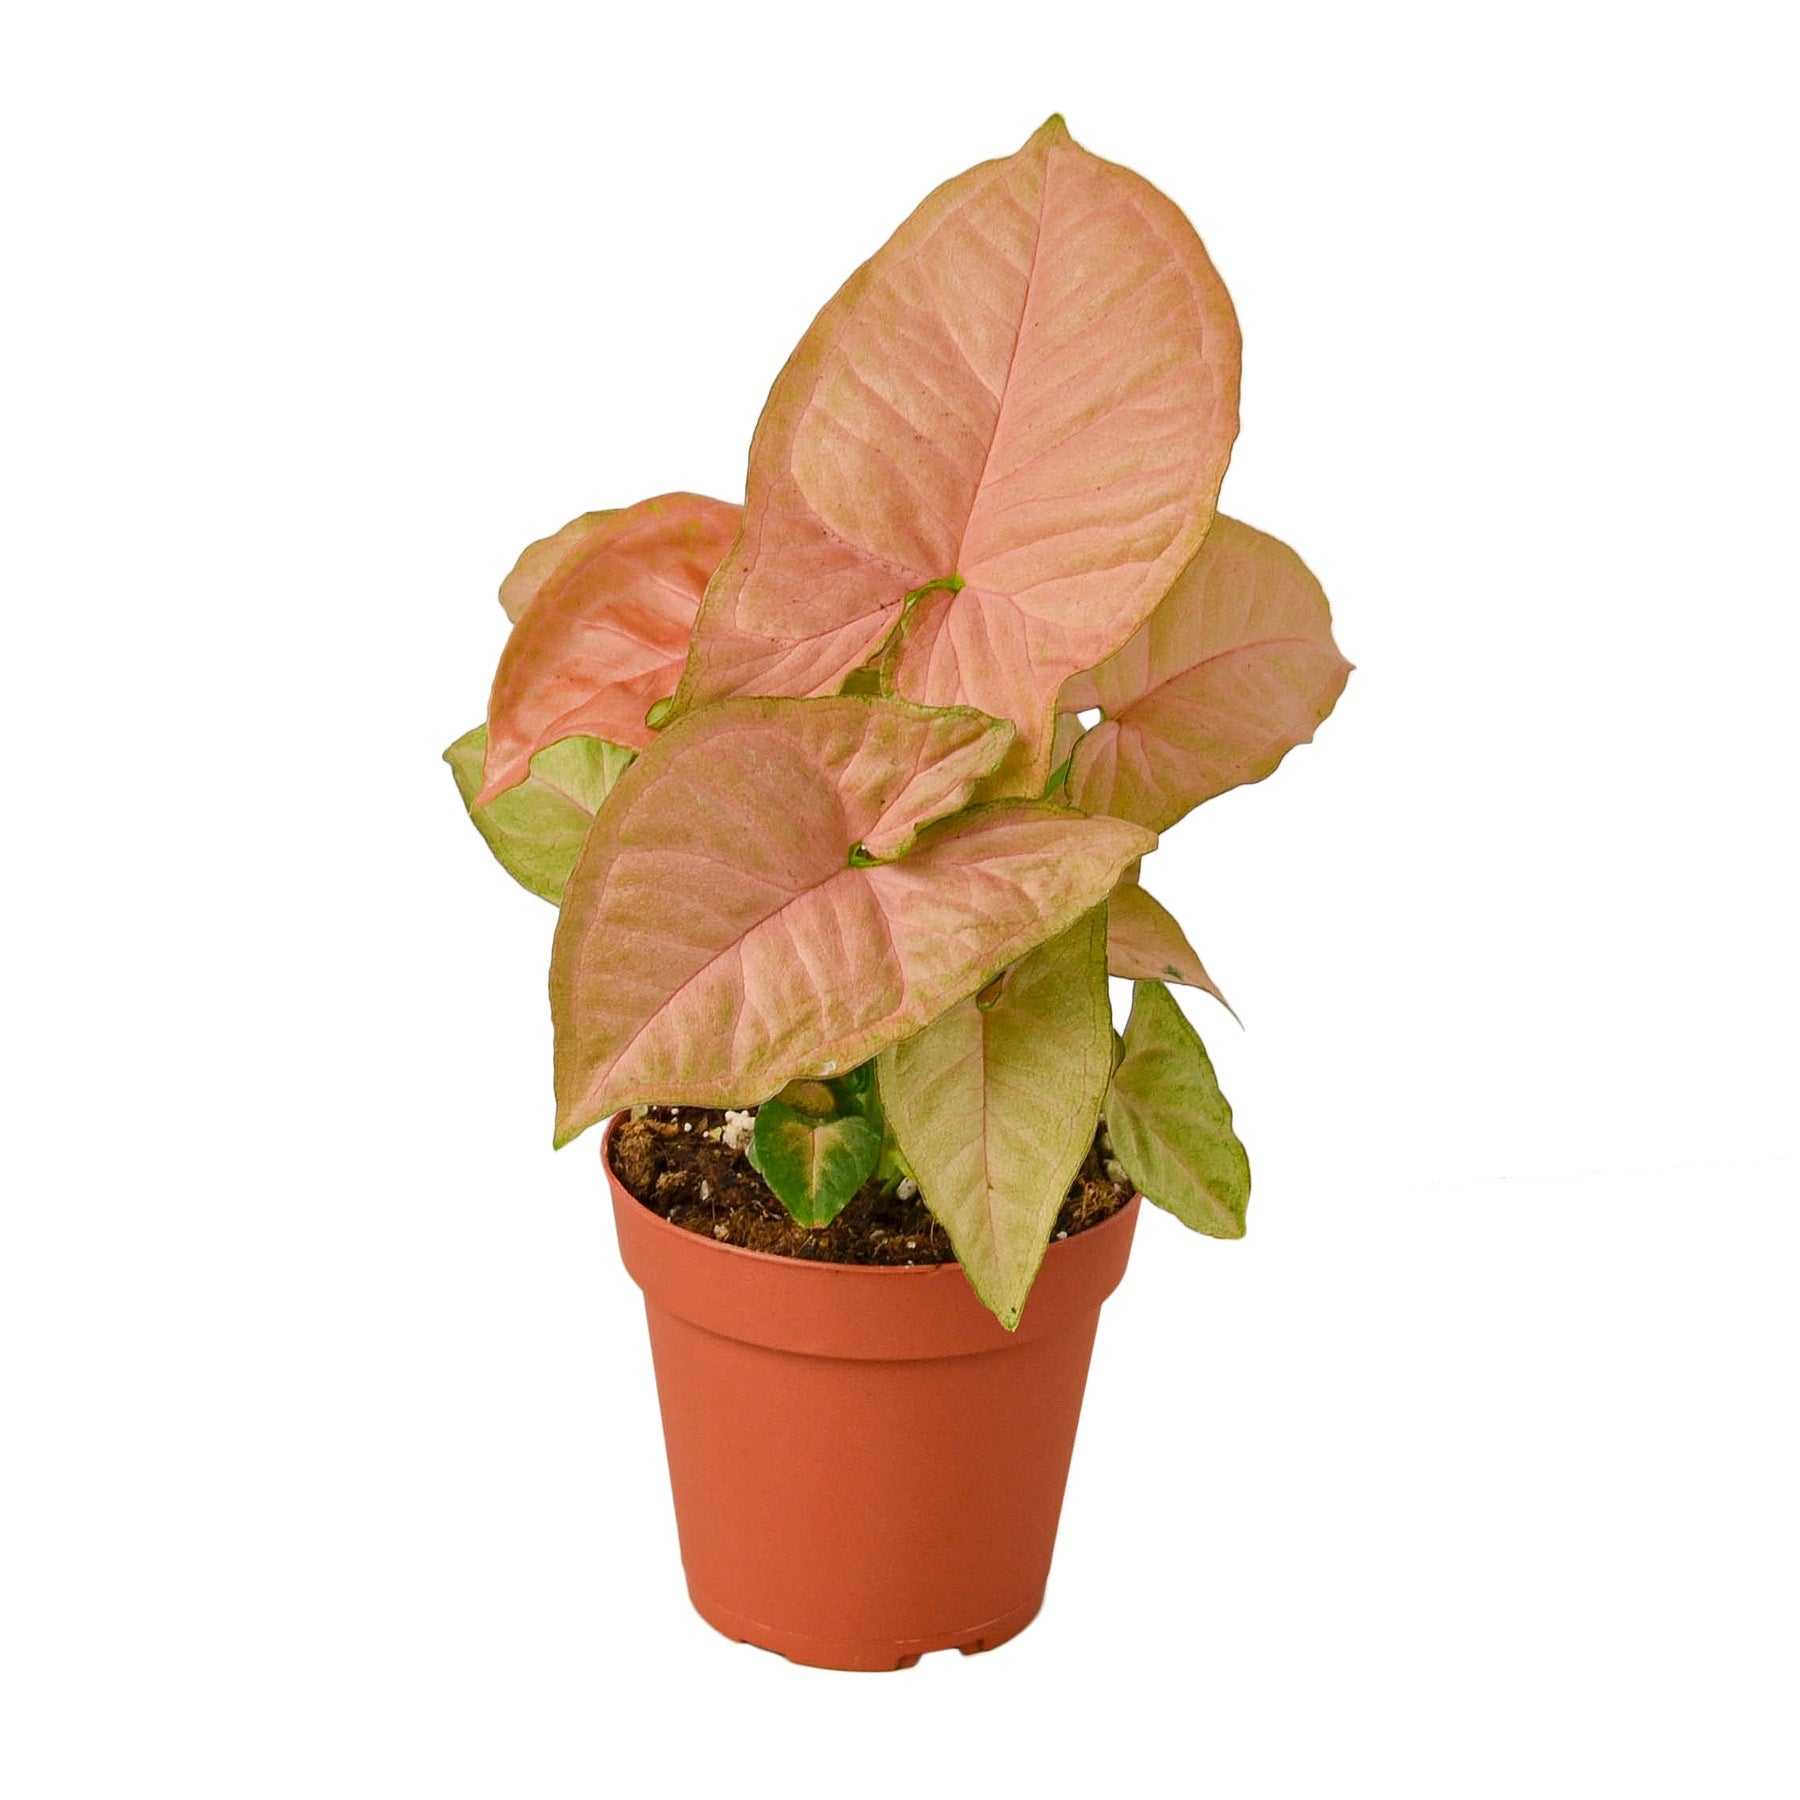 A pink plant in a pot on a white background available at a nearby nursery.